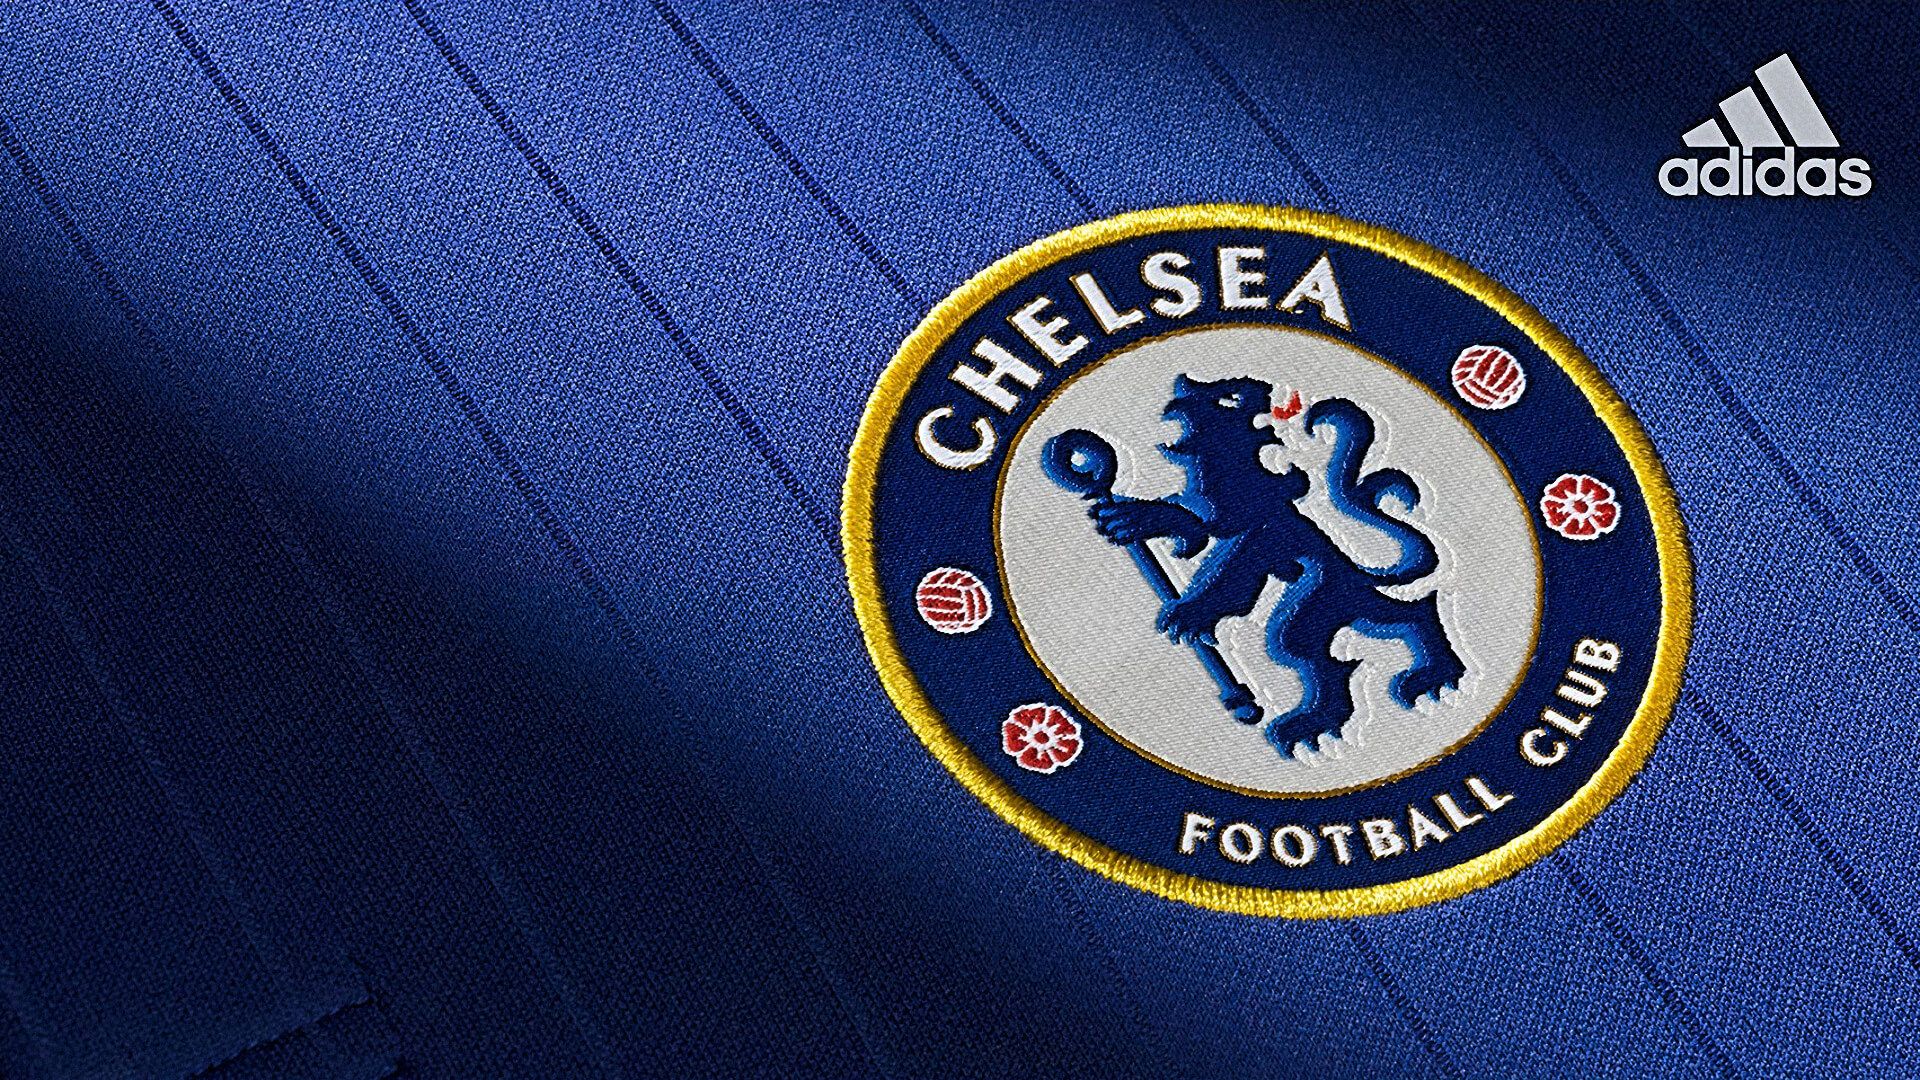 Free download Chelsea Football Club 2015 2016 Adidas Jersey Badge HD Wallpaper [1920x1080] for your Desktop, Mobile & Tablet. Explore Wallpaper Chelsea Fc 2015. Chelsea Fc Logo Wallpaper, Chelsea Fc Wallpaper, Chelsea Wallpaper 2015